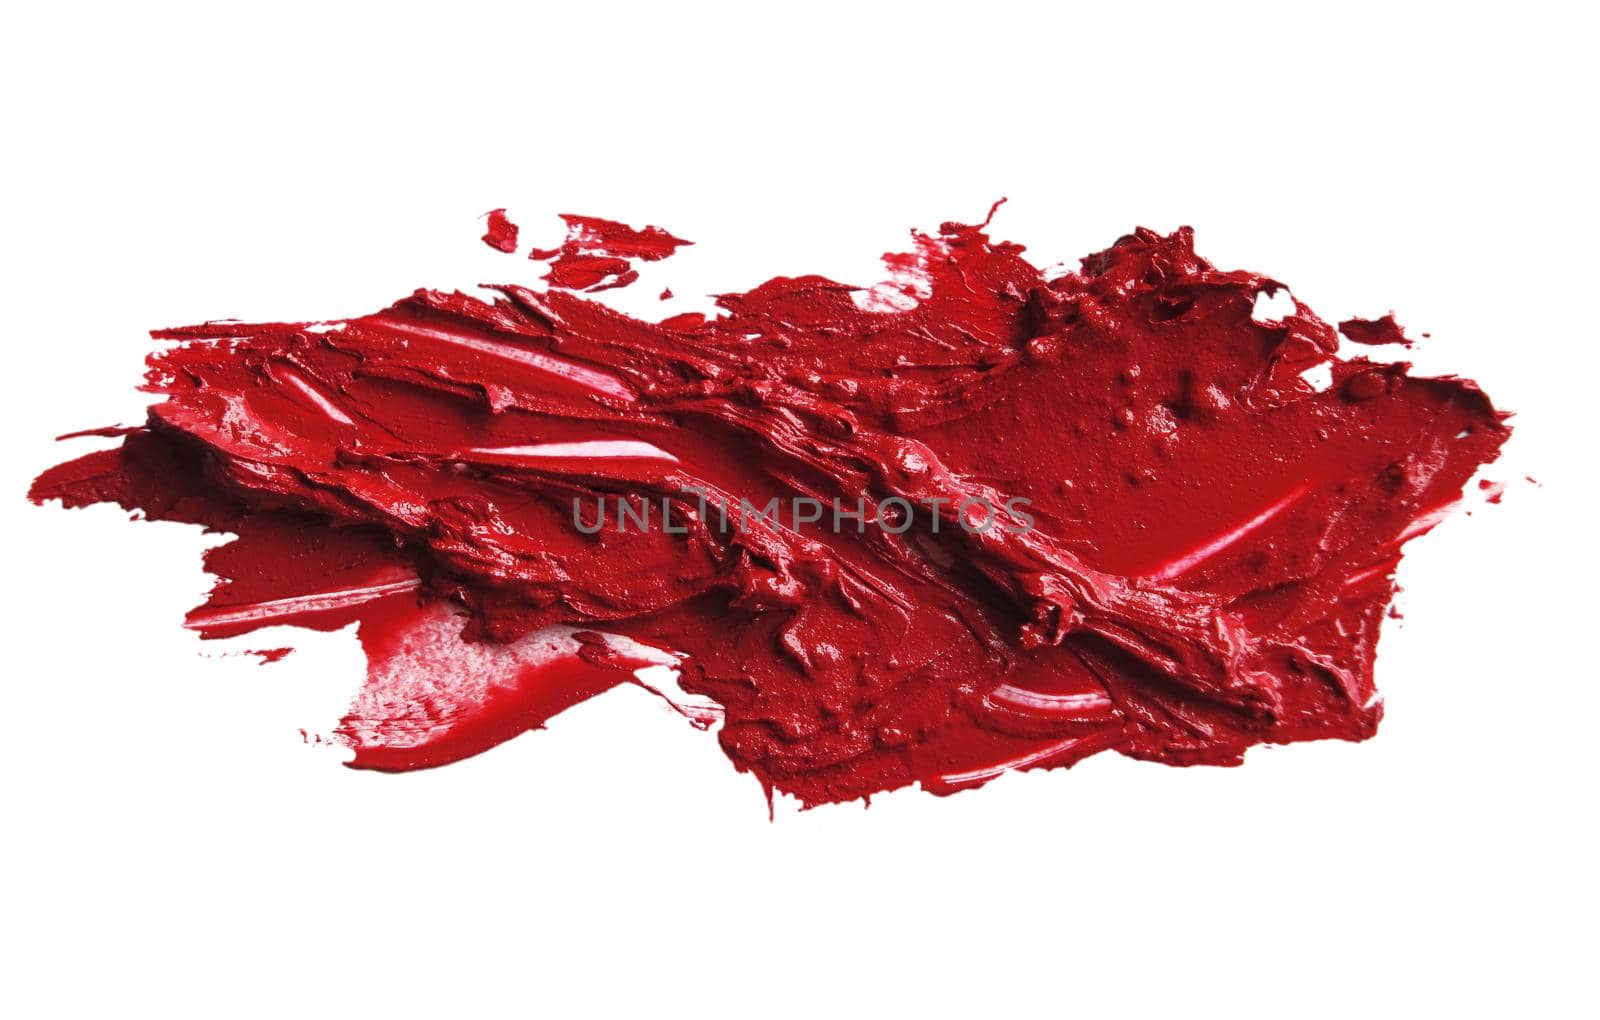 Smudged RED lipstick on white background by aroas